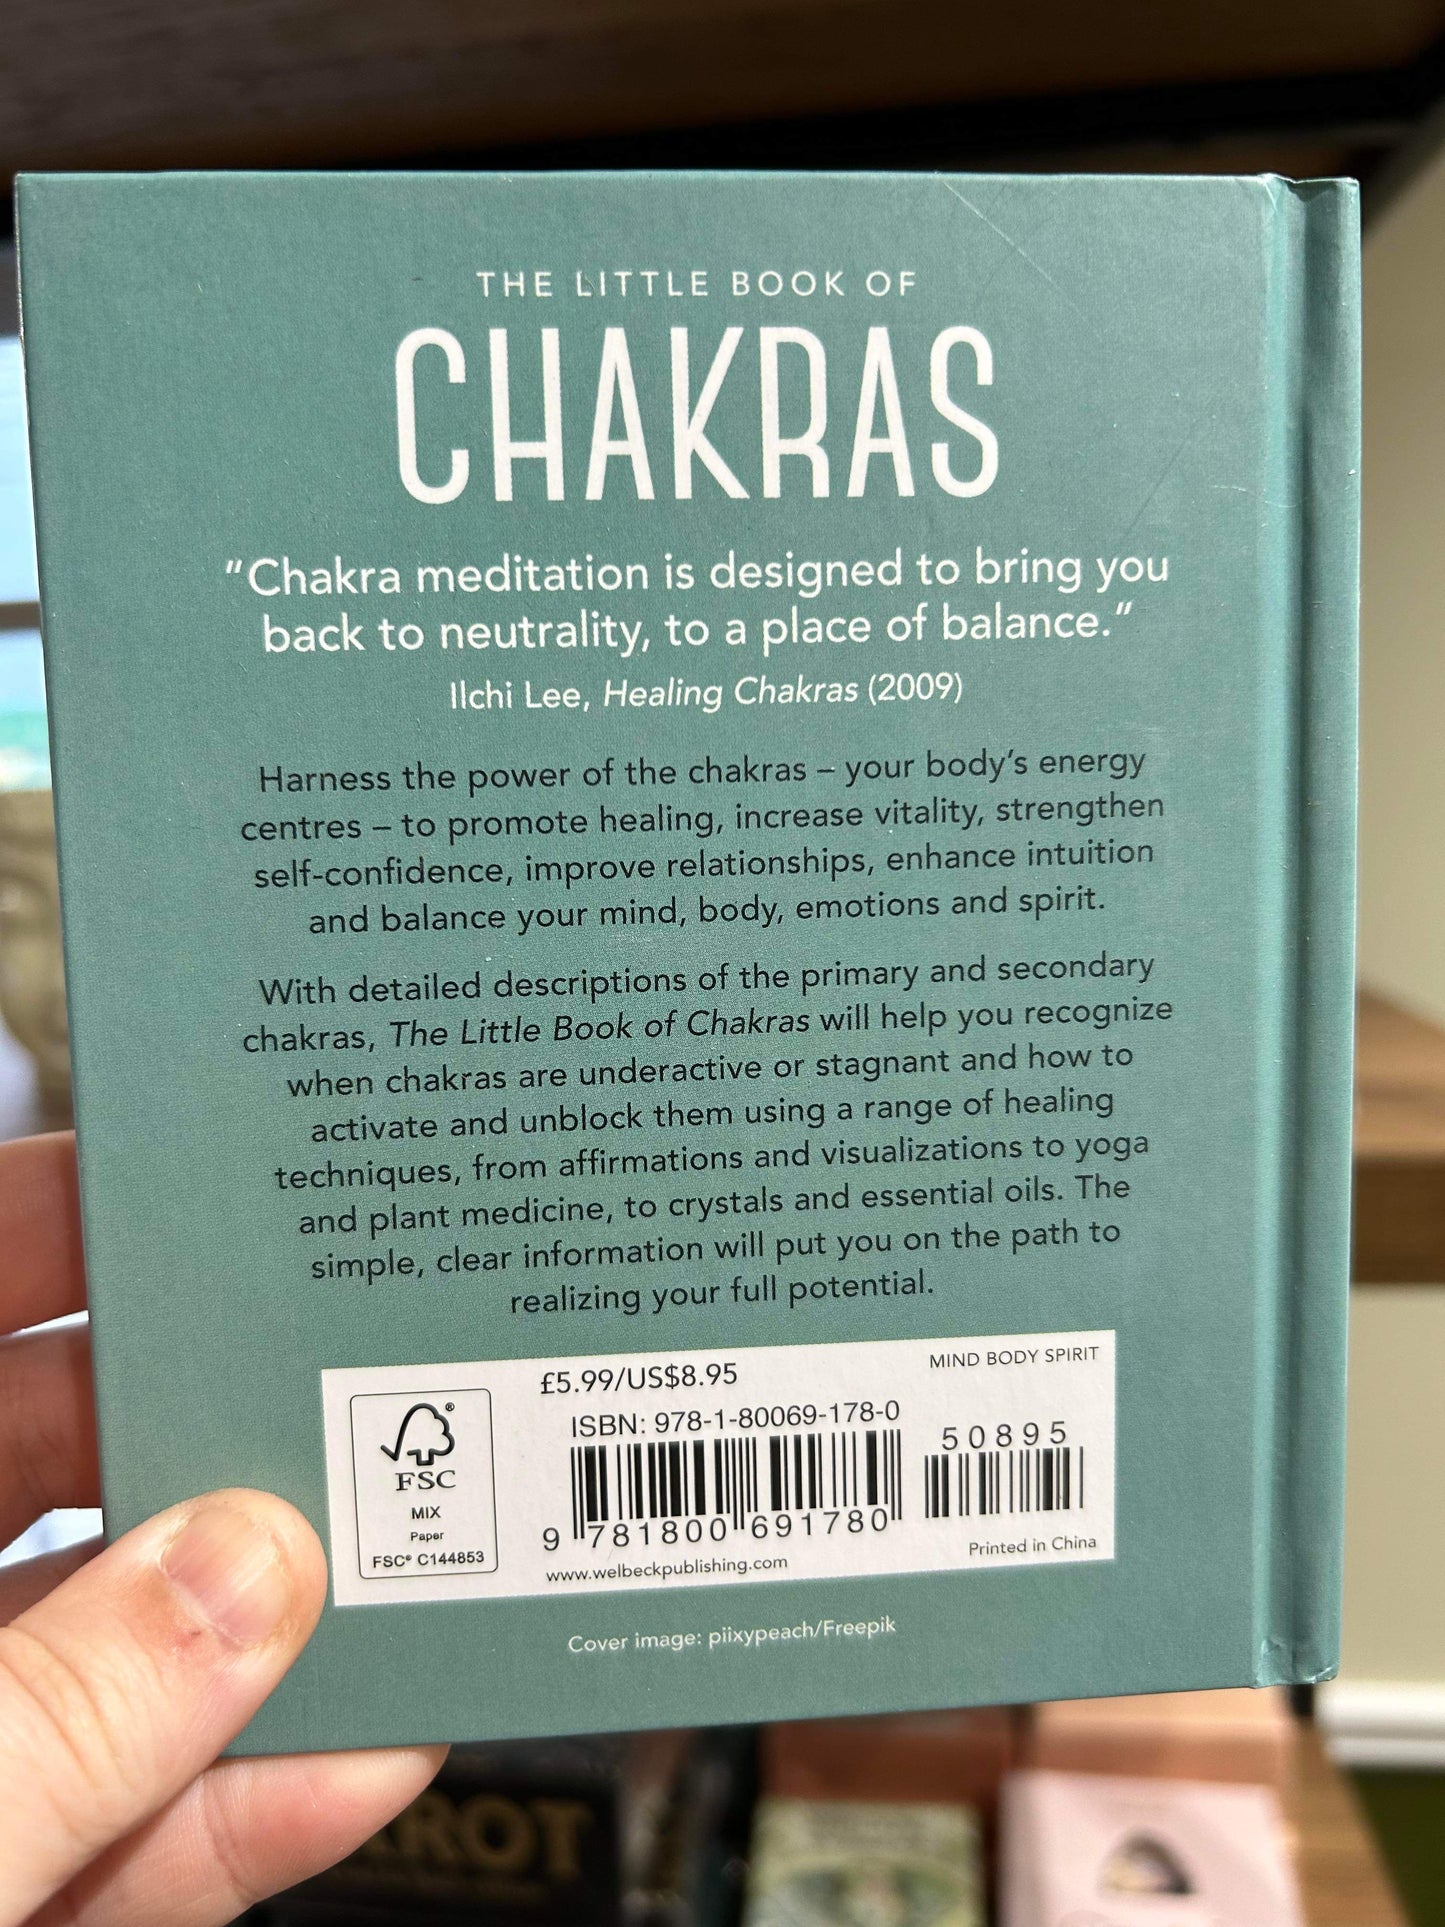 The Little Book of Chakras by Lisa Dyer